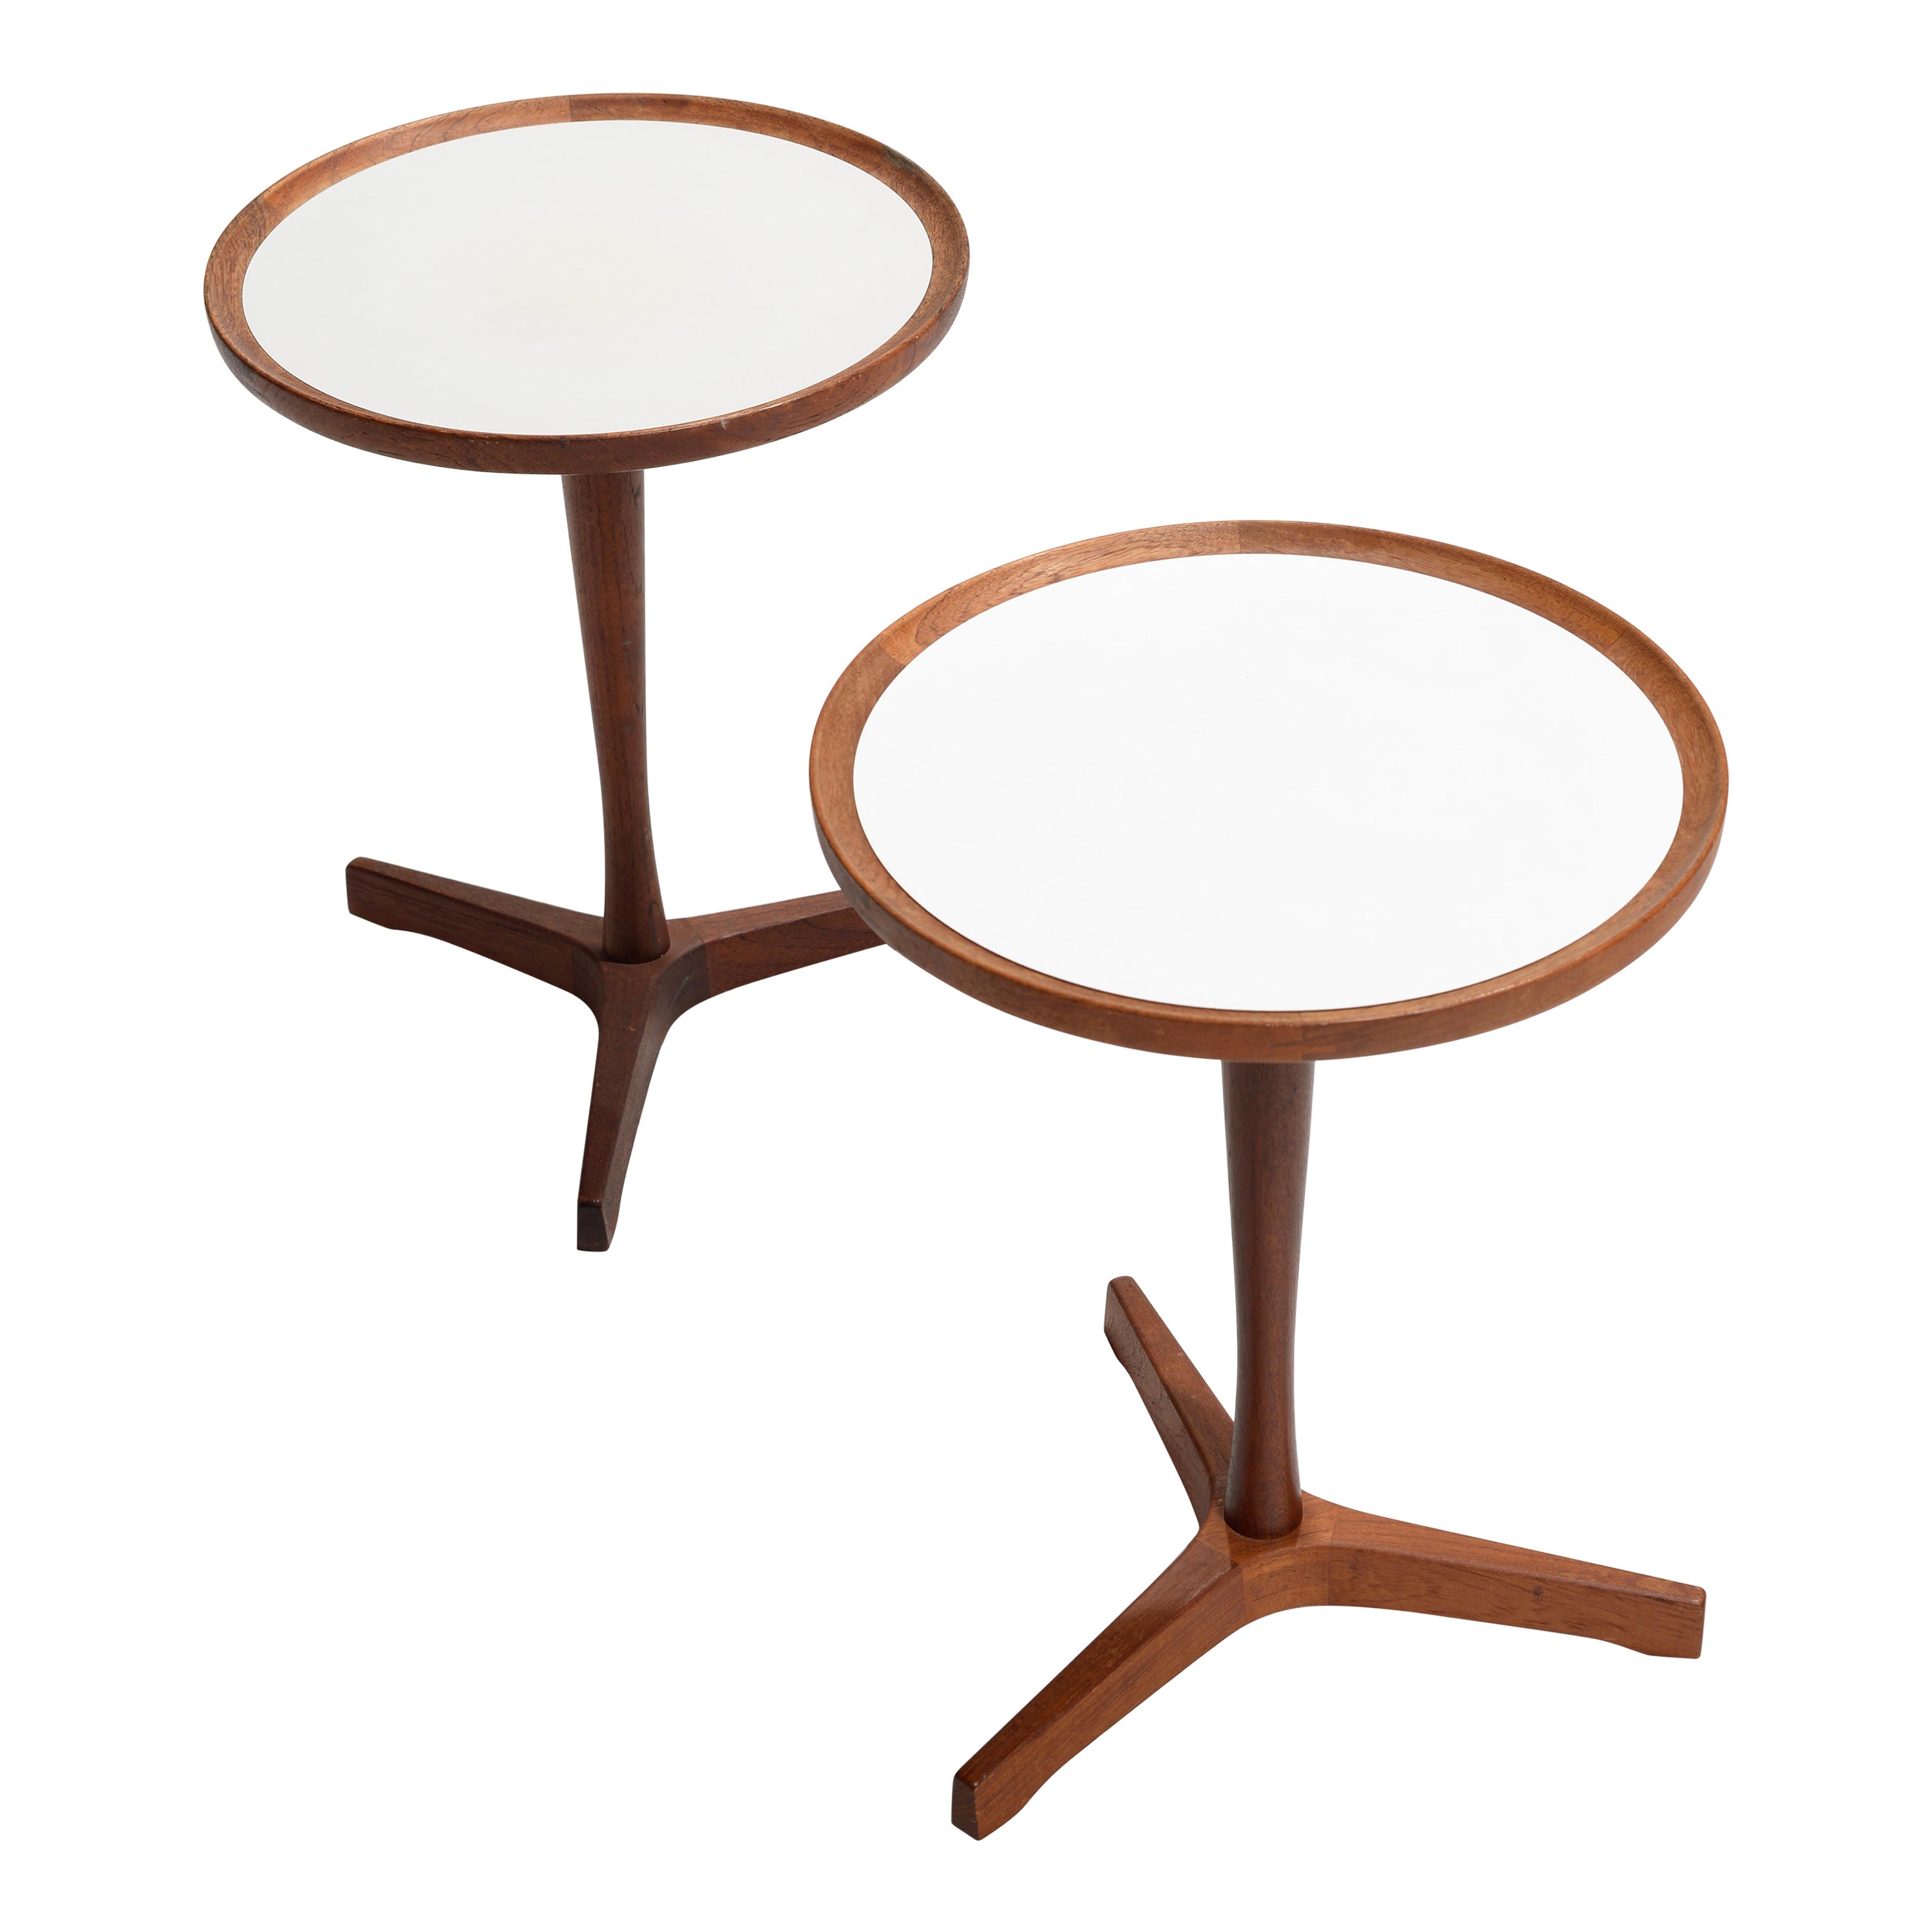 Rare Teak End Tables by Hans C. Andersen, 1950s For Sale